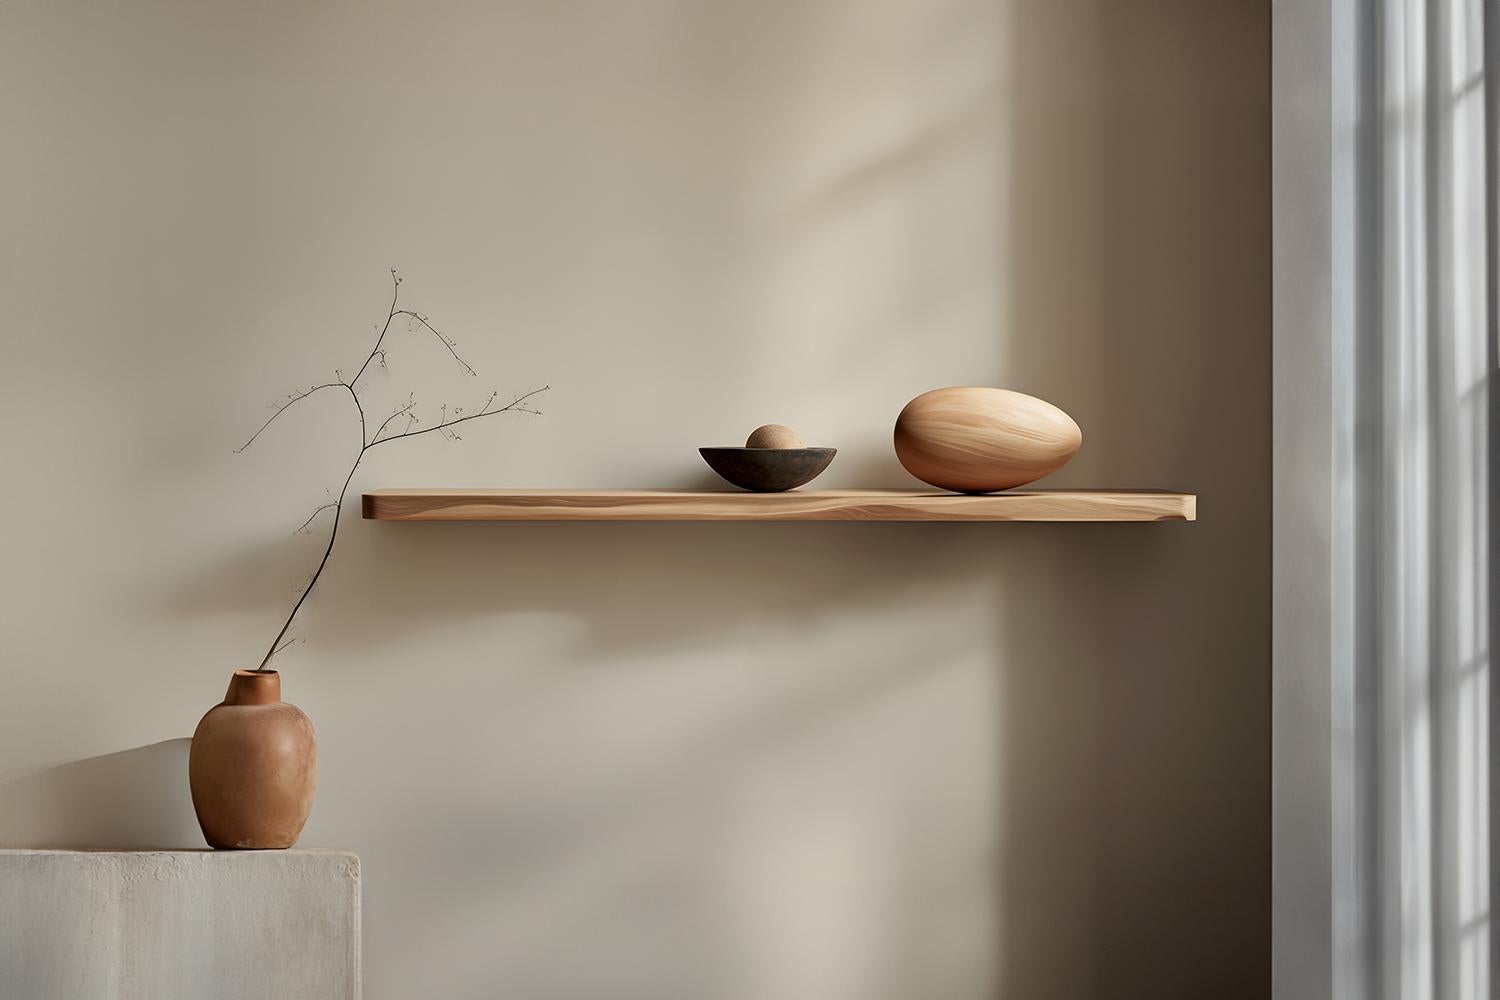 Individual Floating Shelf with One Sculptural Wooden Pebble Accent, Sereno by Joel Escalona

—

What happens when the practical becomes art?
What happens when ornamentation gains significance?

Those were the questions Joel Escalona asked himself